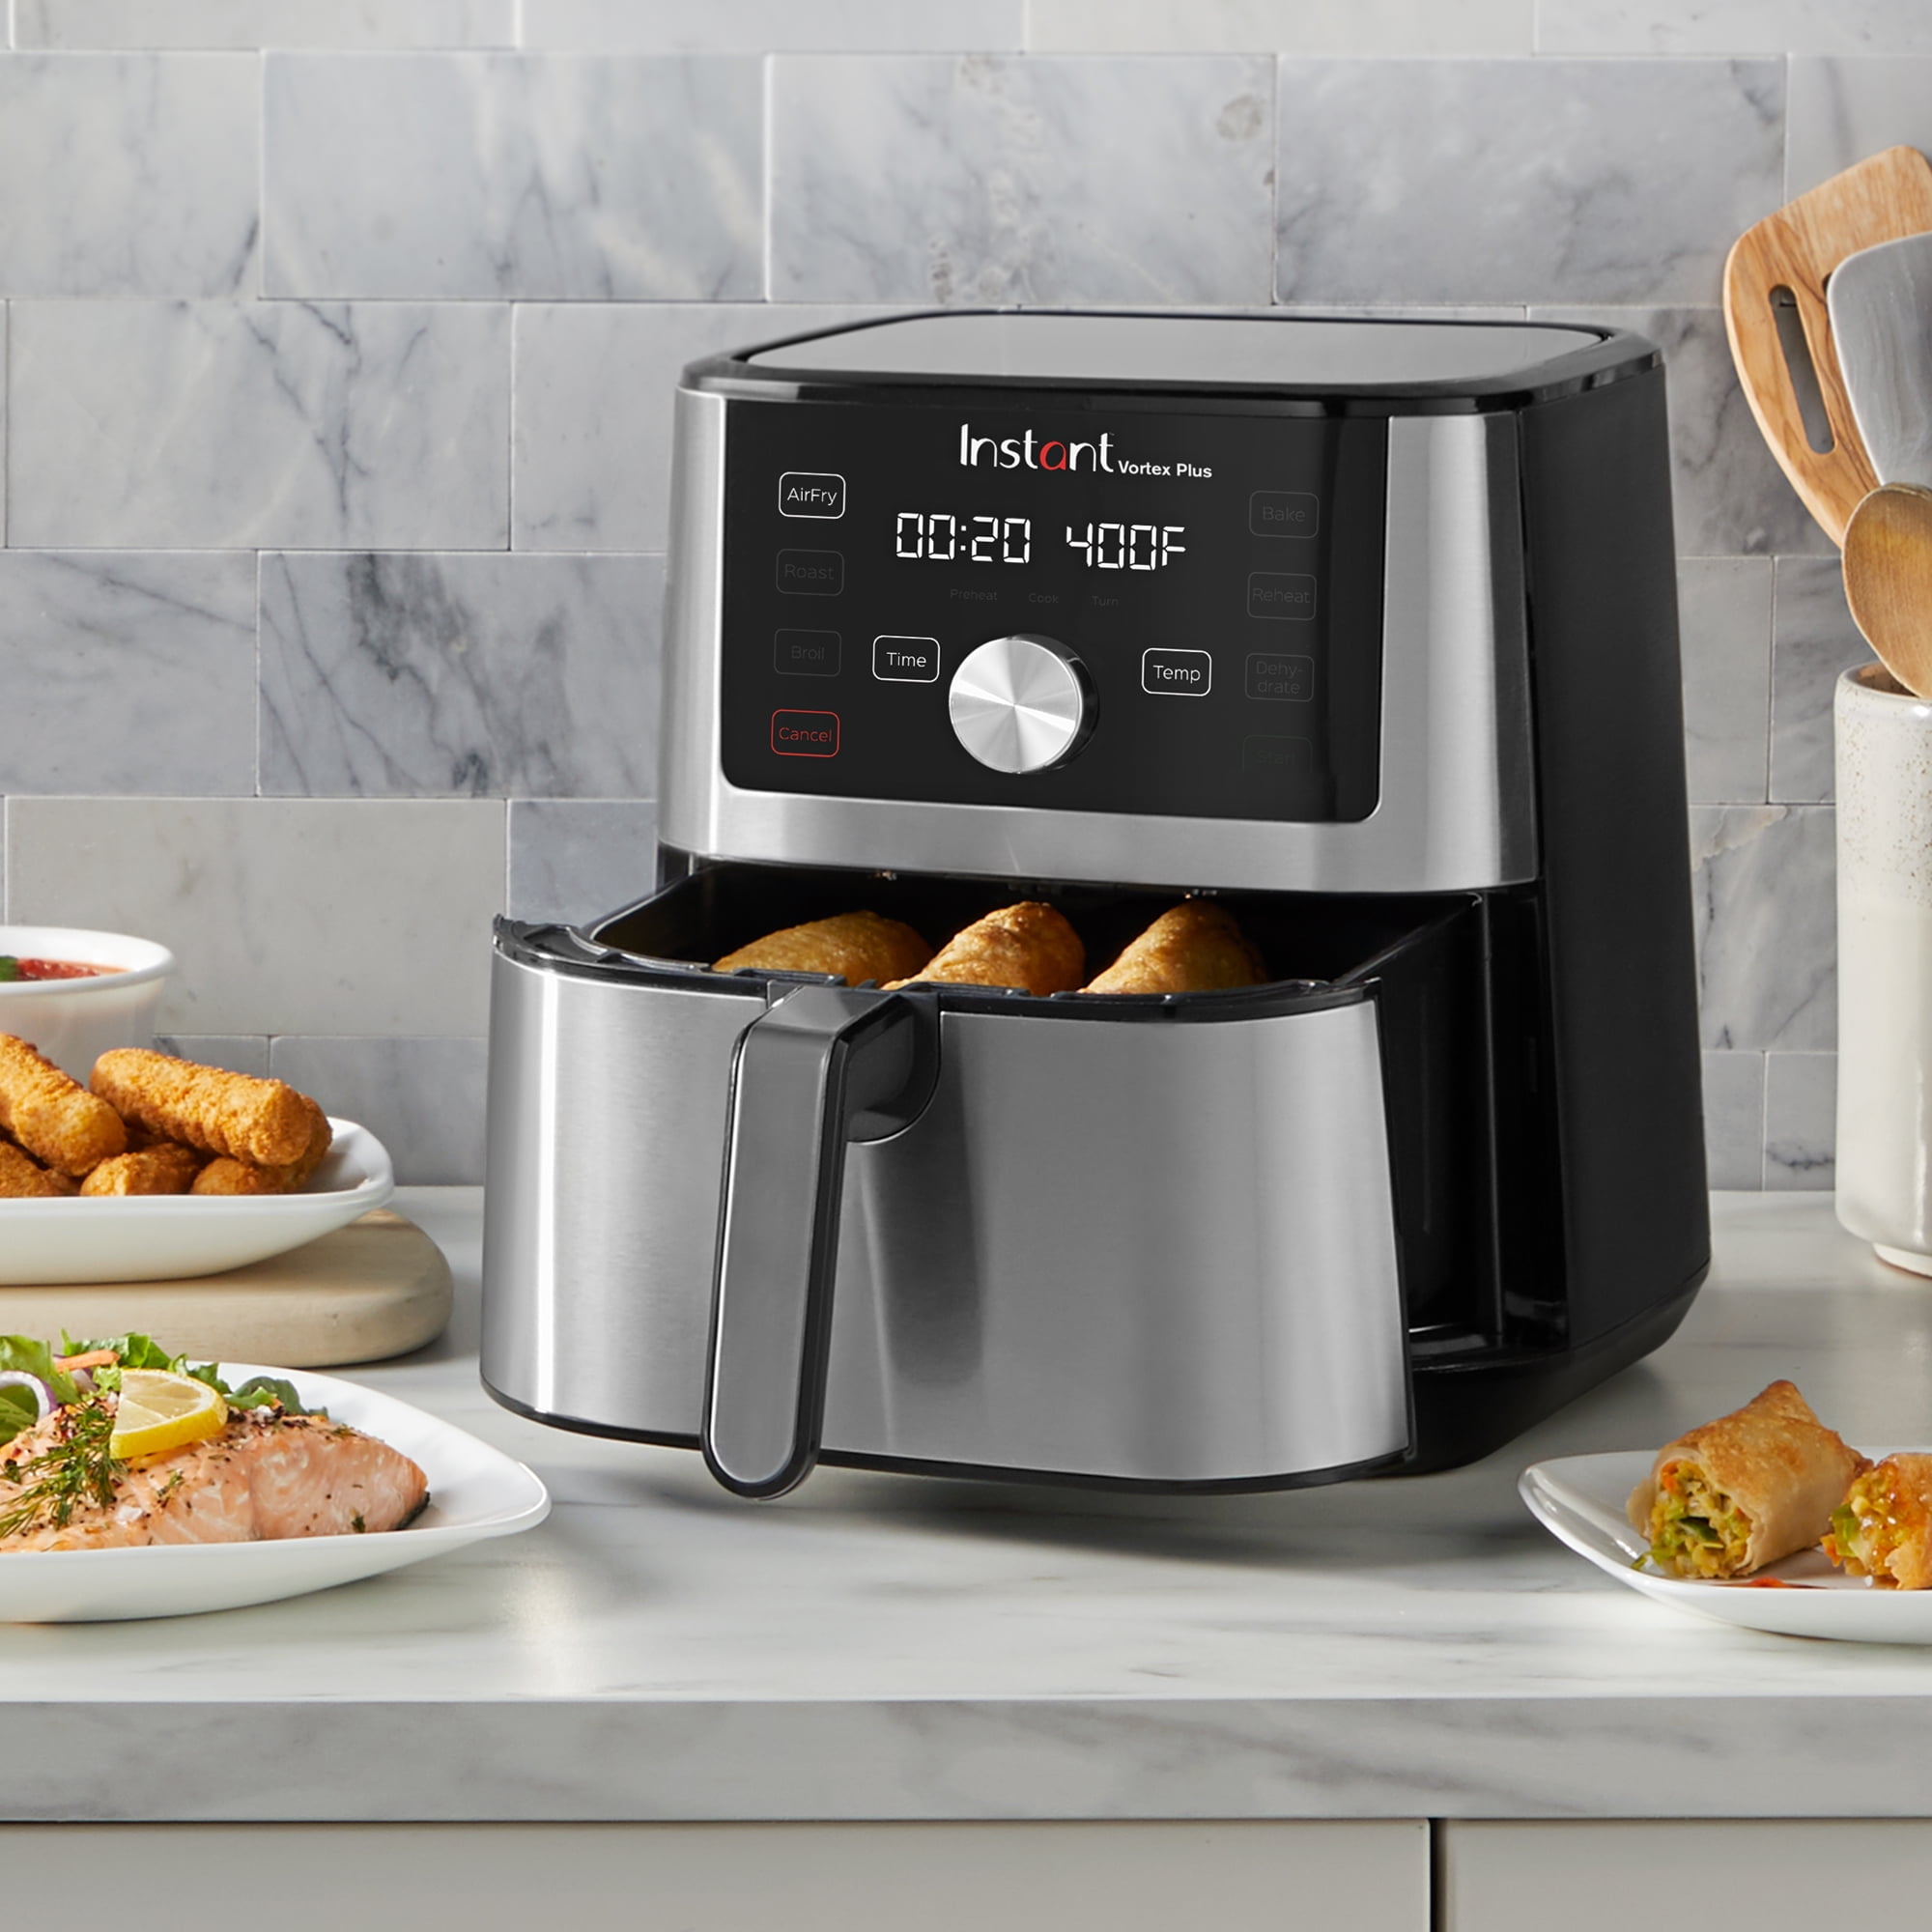 Walmart Jumps Prime Day with Instant Vortex Plus 7-in-1 Air Fryer Oven